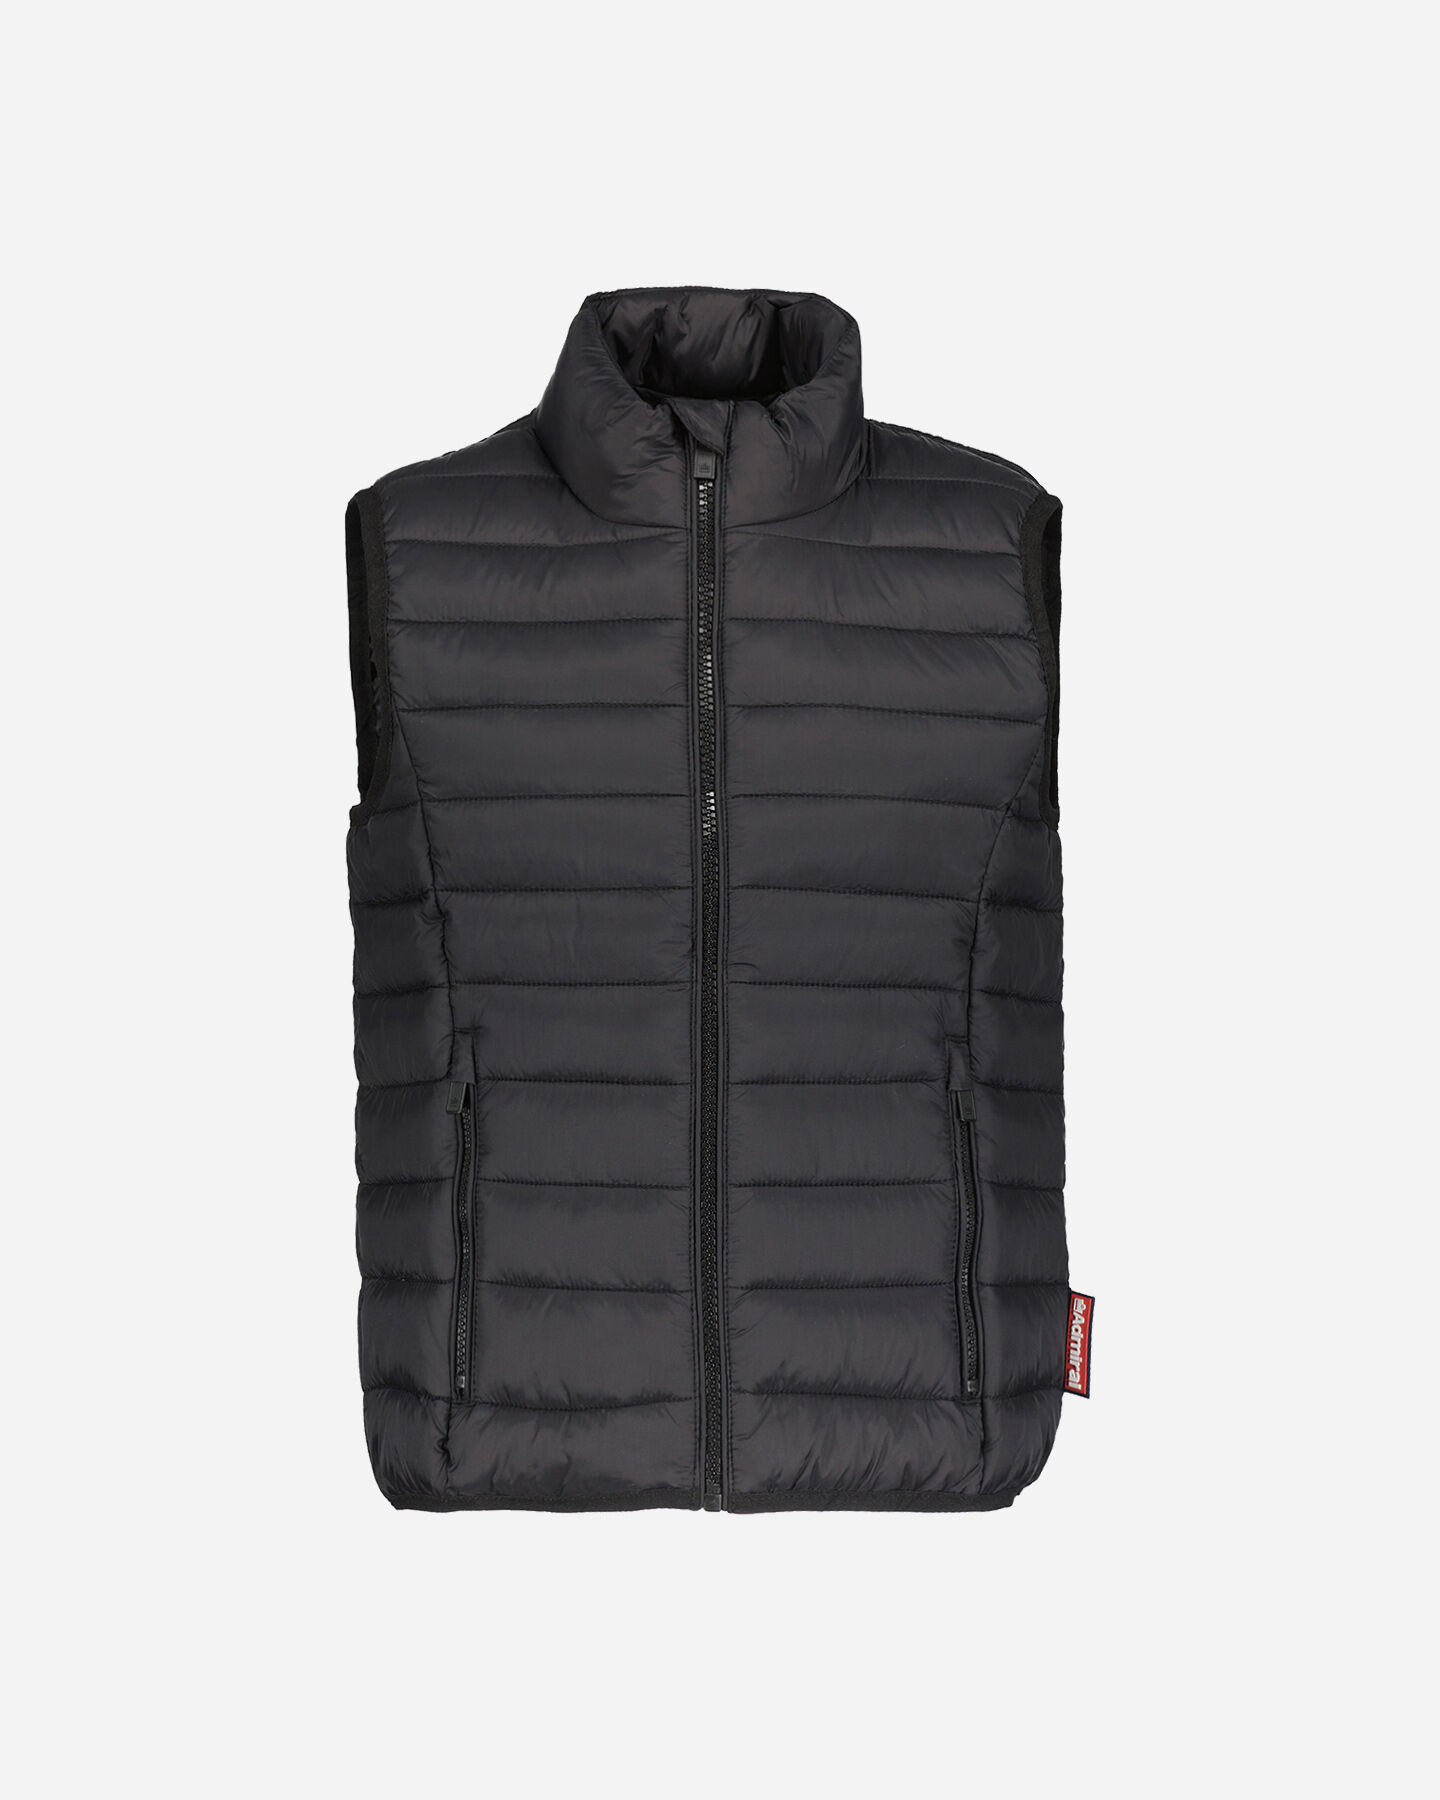  Gilet ADMIRAL LIFESTYLE JR S4130312|050|8A scatto 0